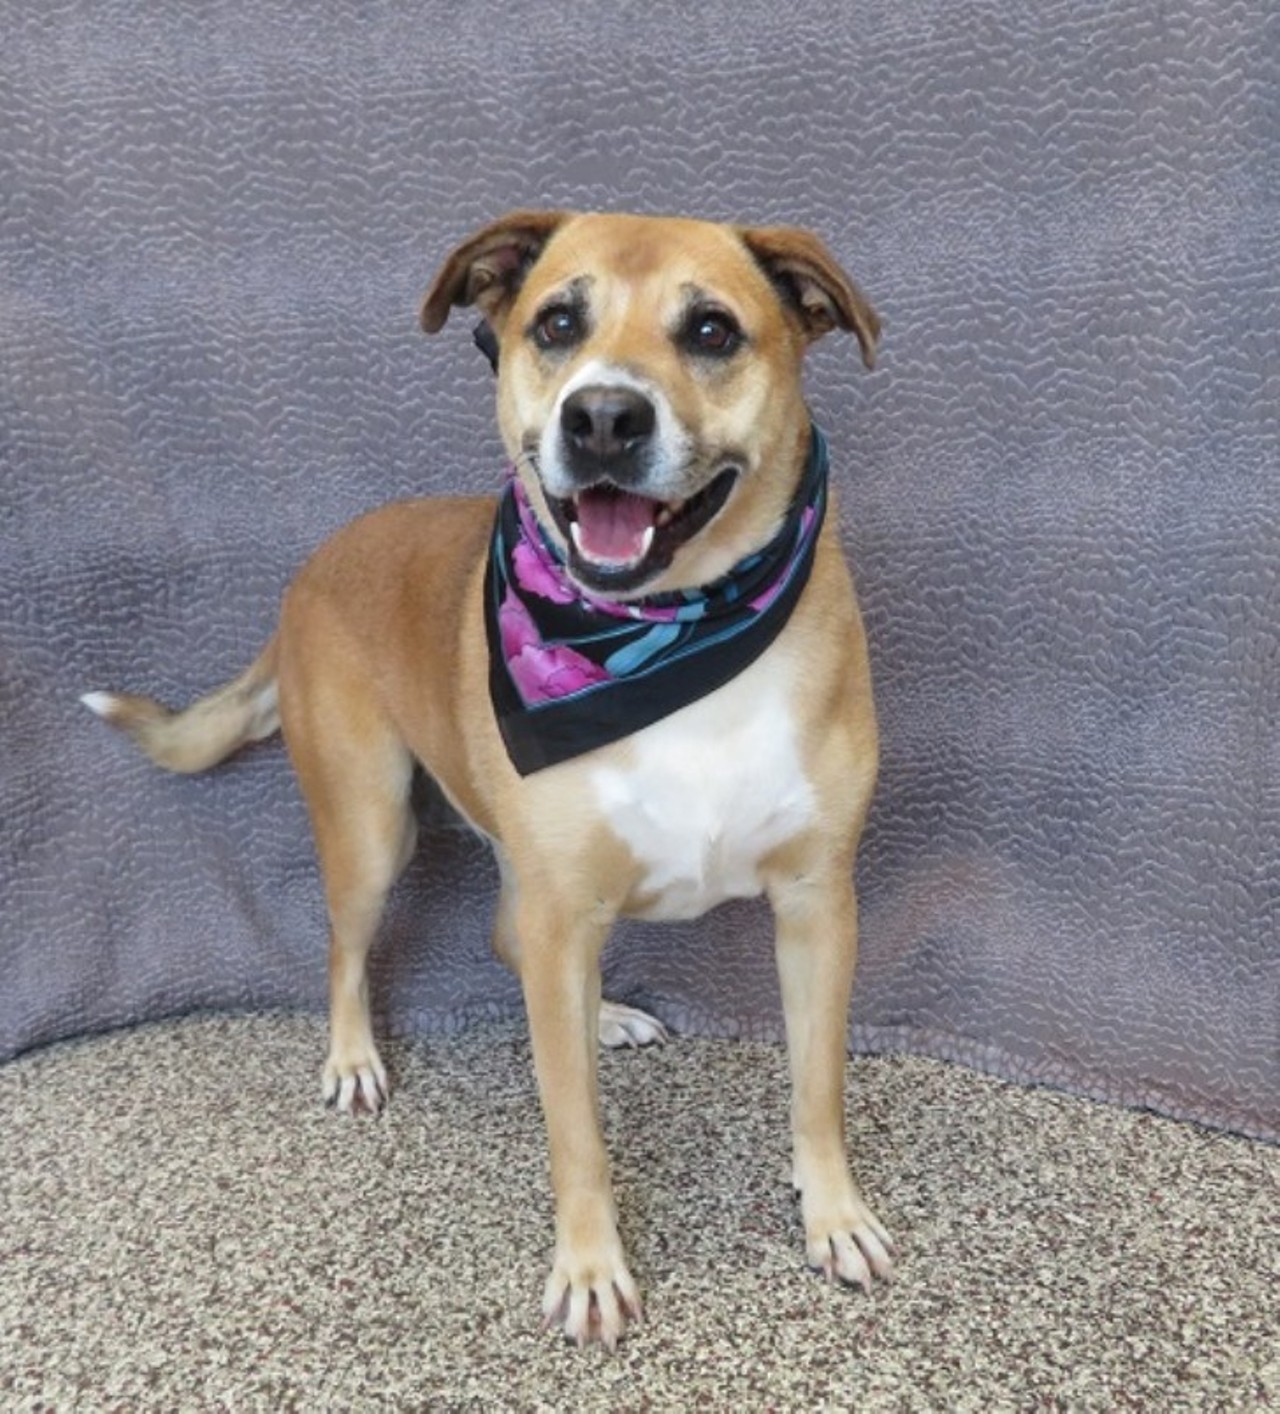 NAME: Lady
GENDER: Female
BREED: Shepherd
AGE: 6 years
WEIGHT: 77 pounds
SPECIAL CONSIDERATIONS: Lady prefers a home with no cats.
REASON I CAME TO MHS: Owner surrender
LOCATION: Petco of Sterling Heights
ID NUMBER: 873019